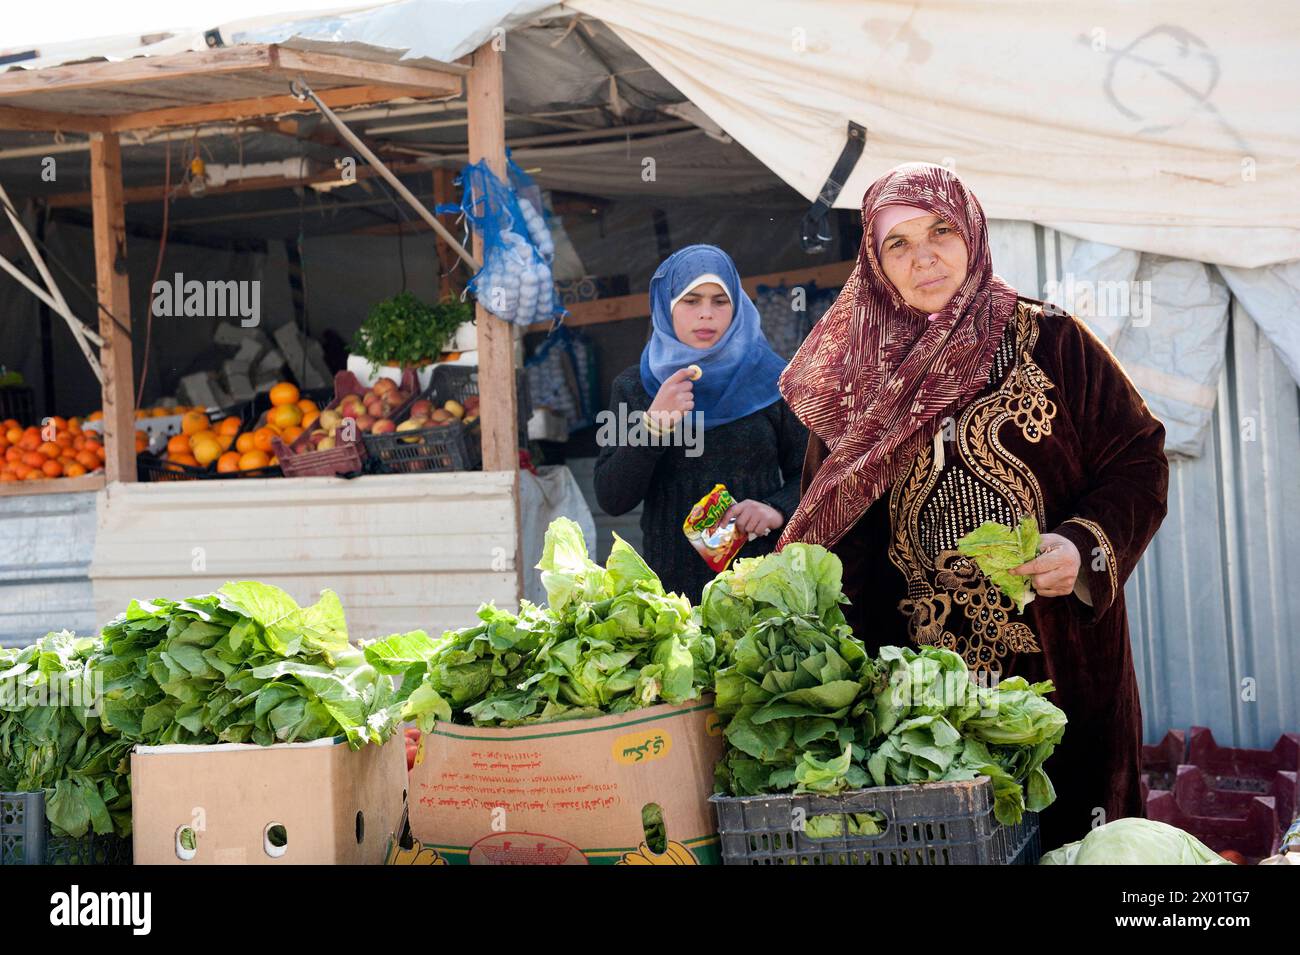 Fruit and Vegetables Soon after arriving at Refugee Camp Al Za atari, this resiliant and entrepreneurial mother and her daughter opened a fresh Fruit and Vegetable Market at Champs Elisee inside the Camp. It provides a family income. Al Za atari, Al Mafraq, Jordan. Al Za atari Al Za atari, Al Zaatari, Zaatari Al Mafraq Jordaanie Copyright: xGuidoxKoppesxPhotox Stock Photo